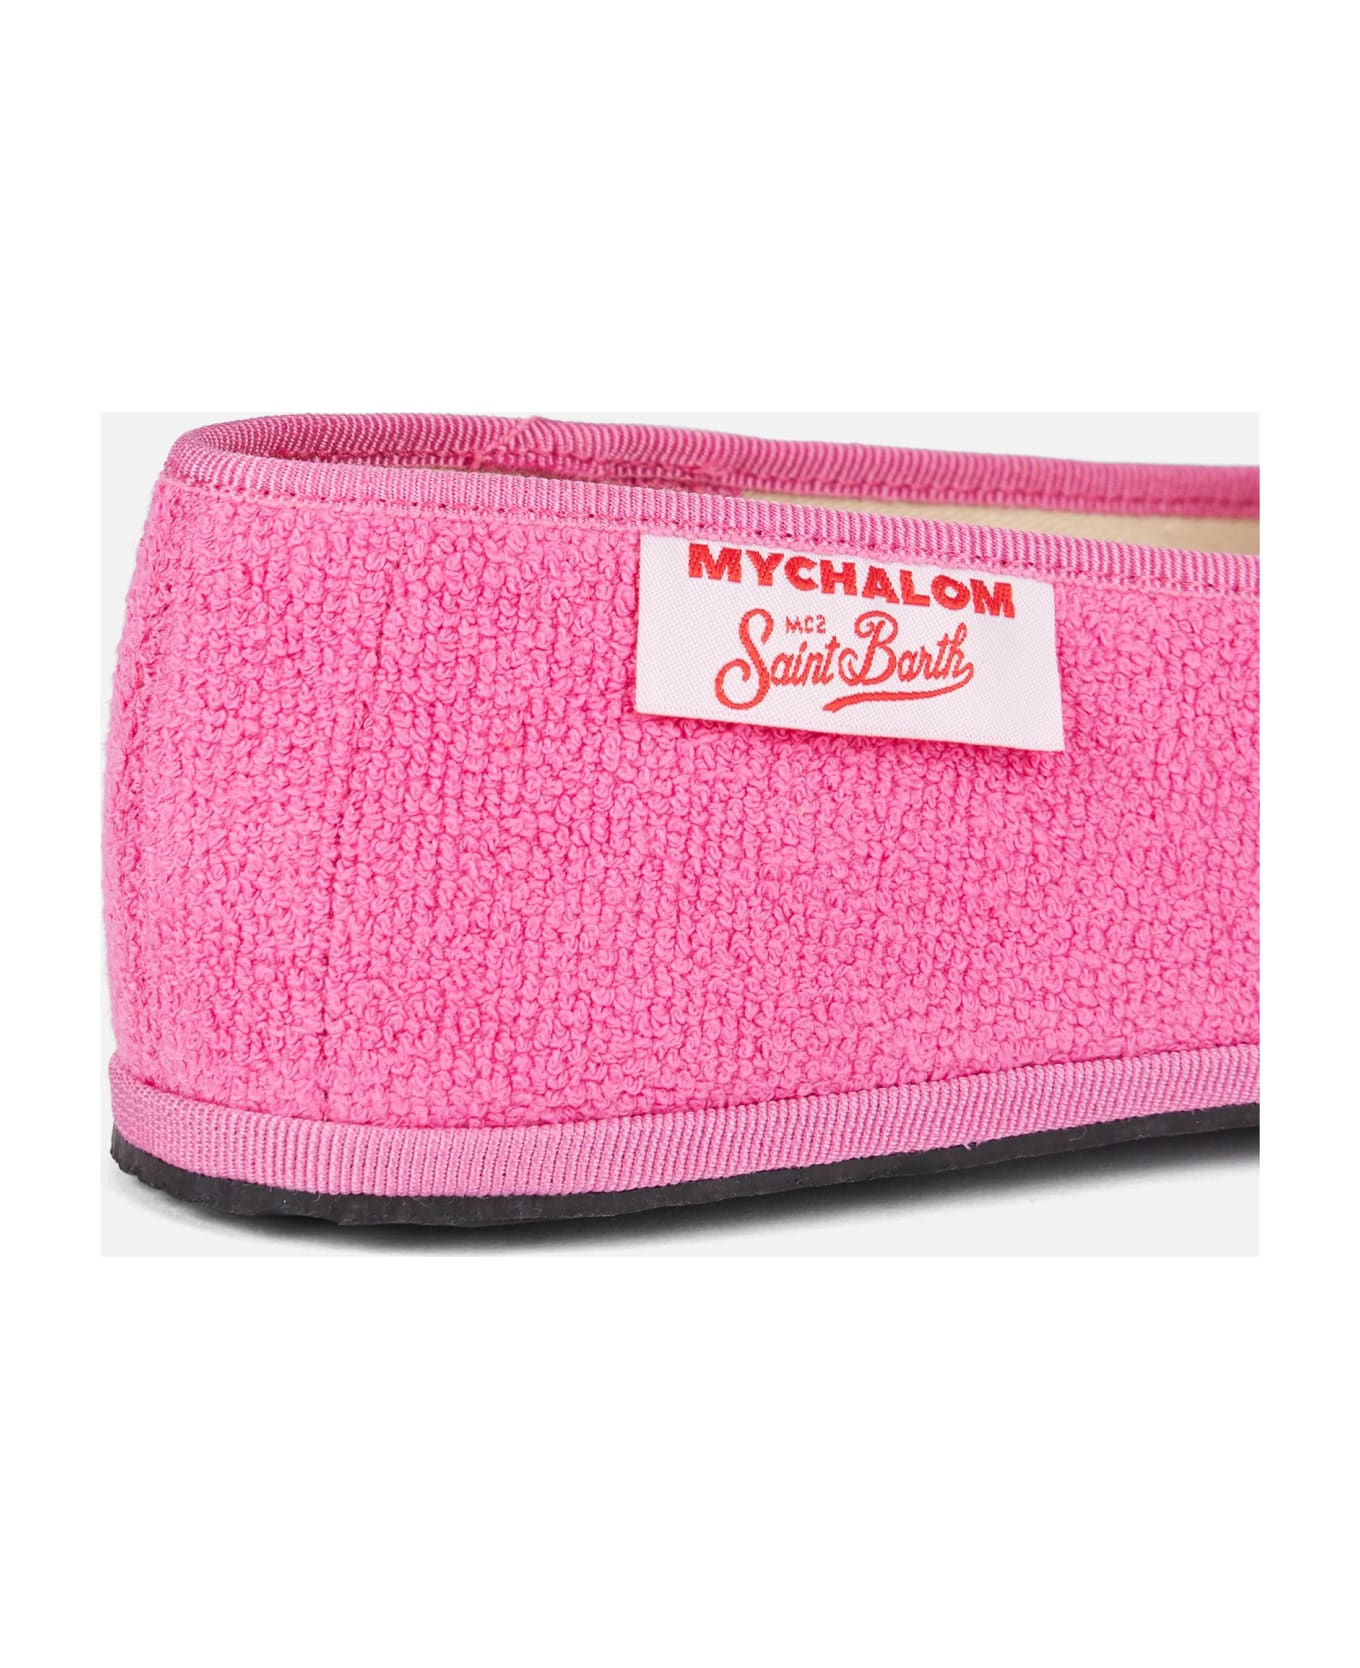 MC2 Saint Barth Woman Pink Terry Slipper Loafer | My Chalom Special Edition - PINK